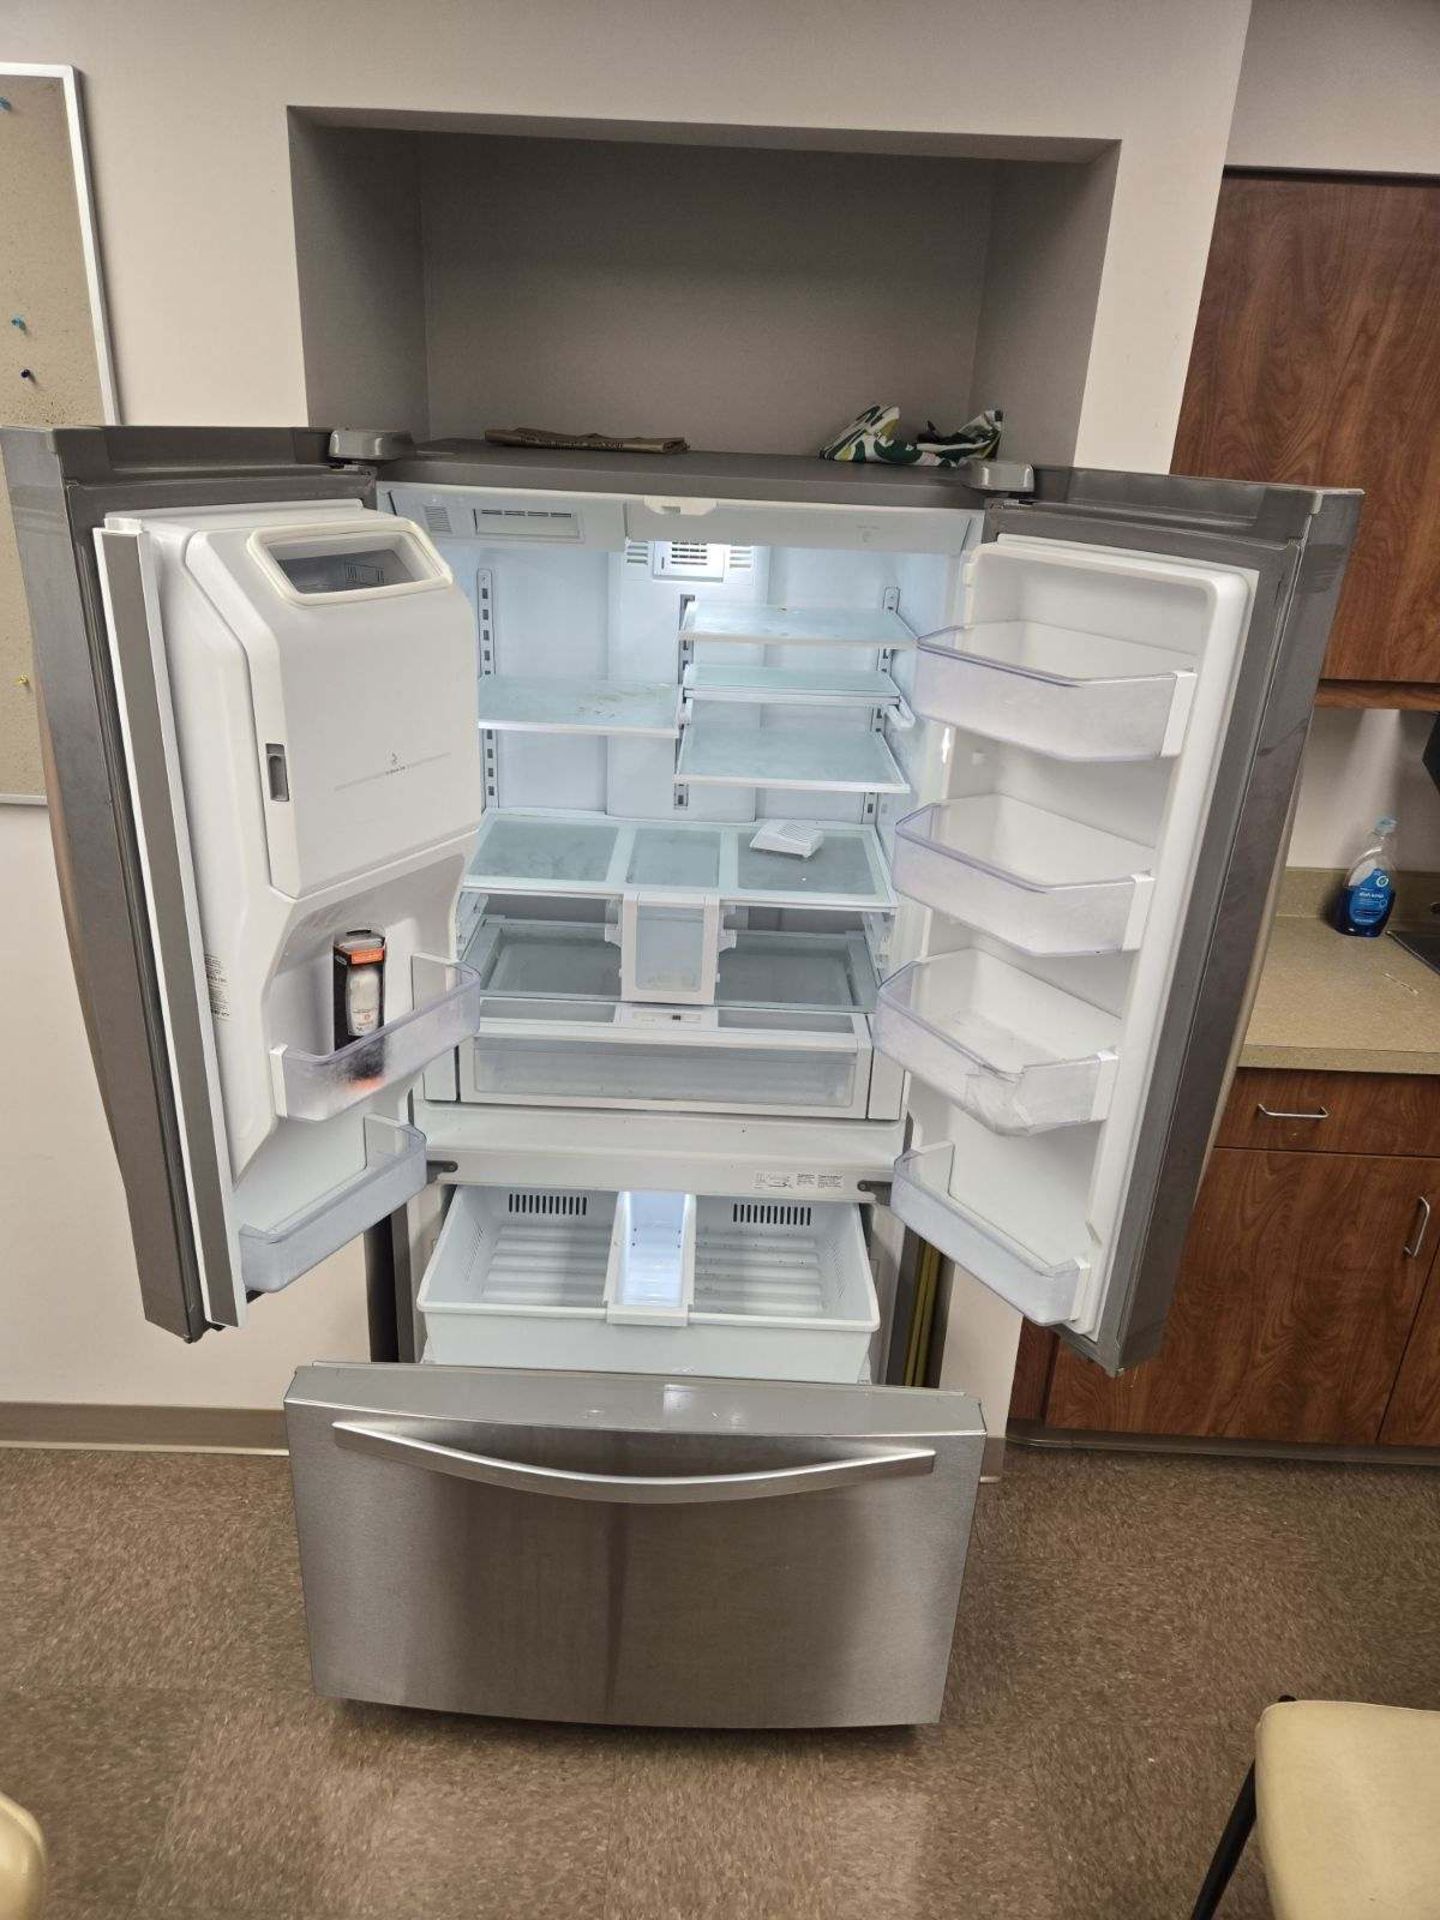 STAFF LOUNGE TO INCLUDE WHIRLPOOL 2-DOOR HOUSEHOLD REFRIGERATOR/FREEZER WITH DISPENSER, TABLES, - Image 3 of 5